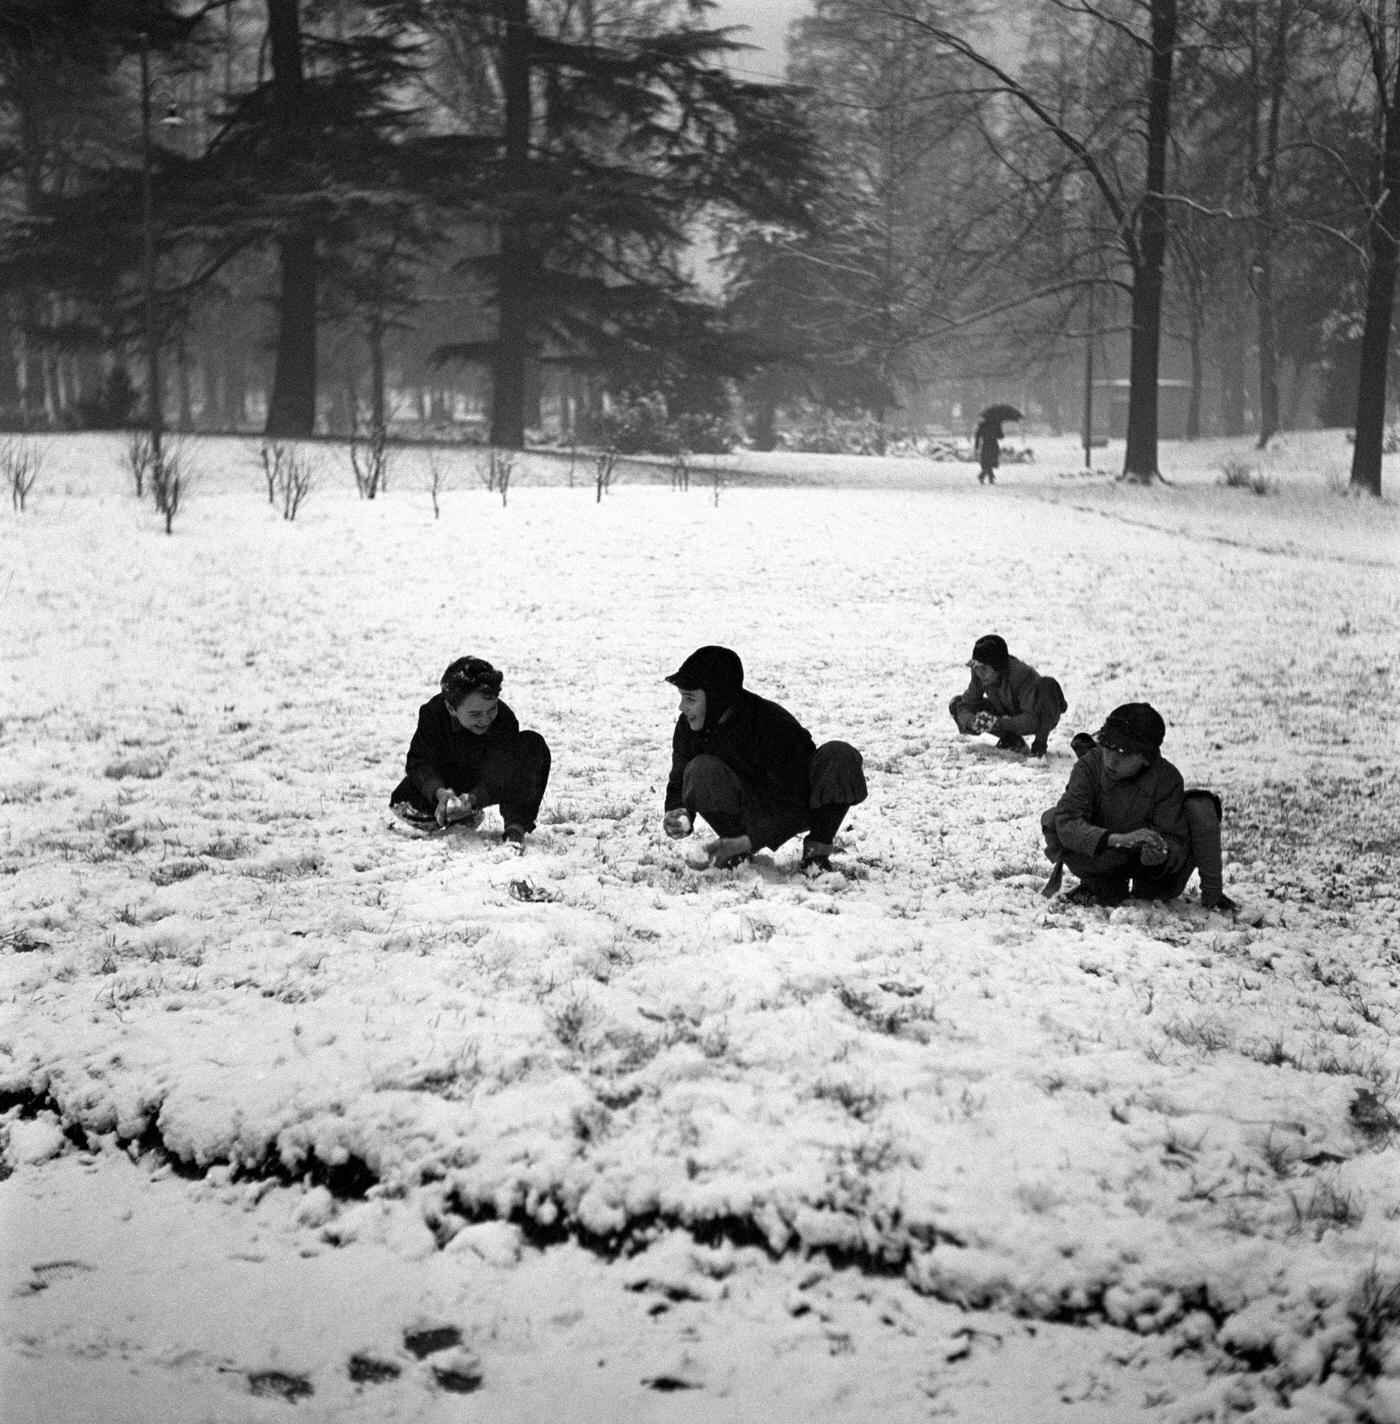 Children playing with snow in a park after a snowfall. Milan, 1950s.